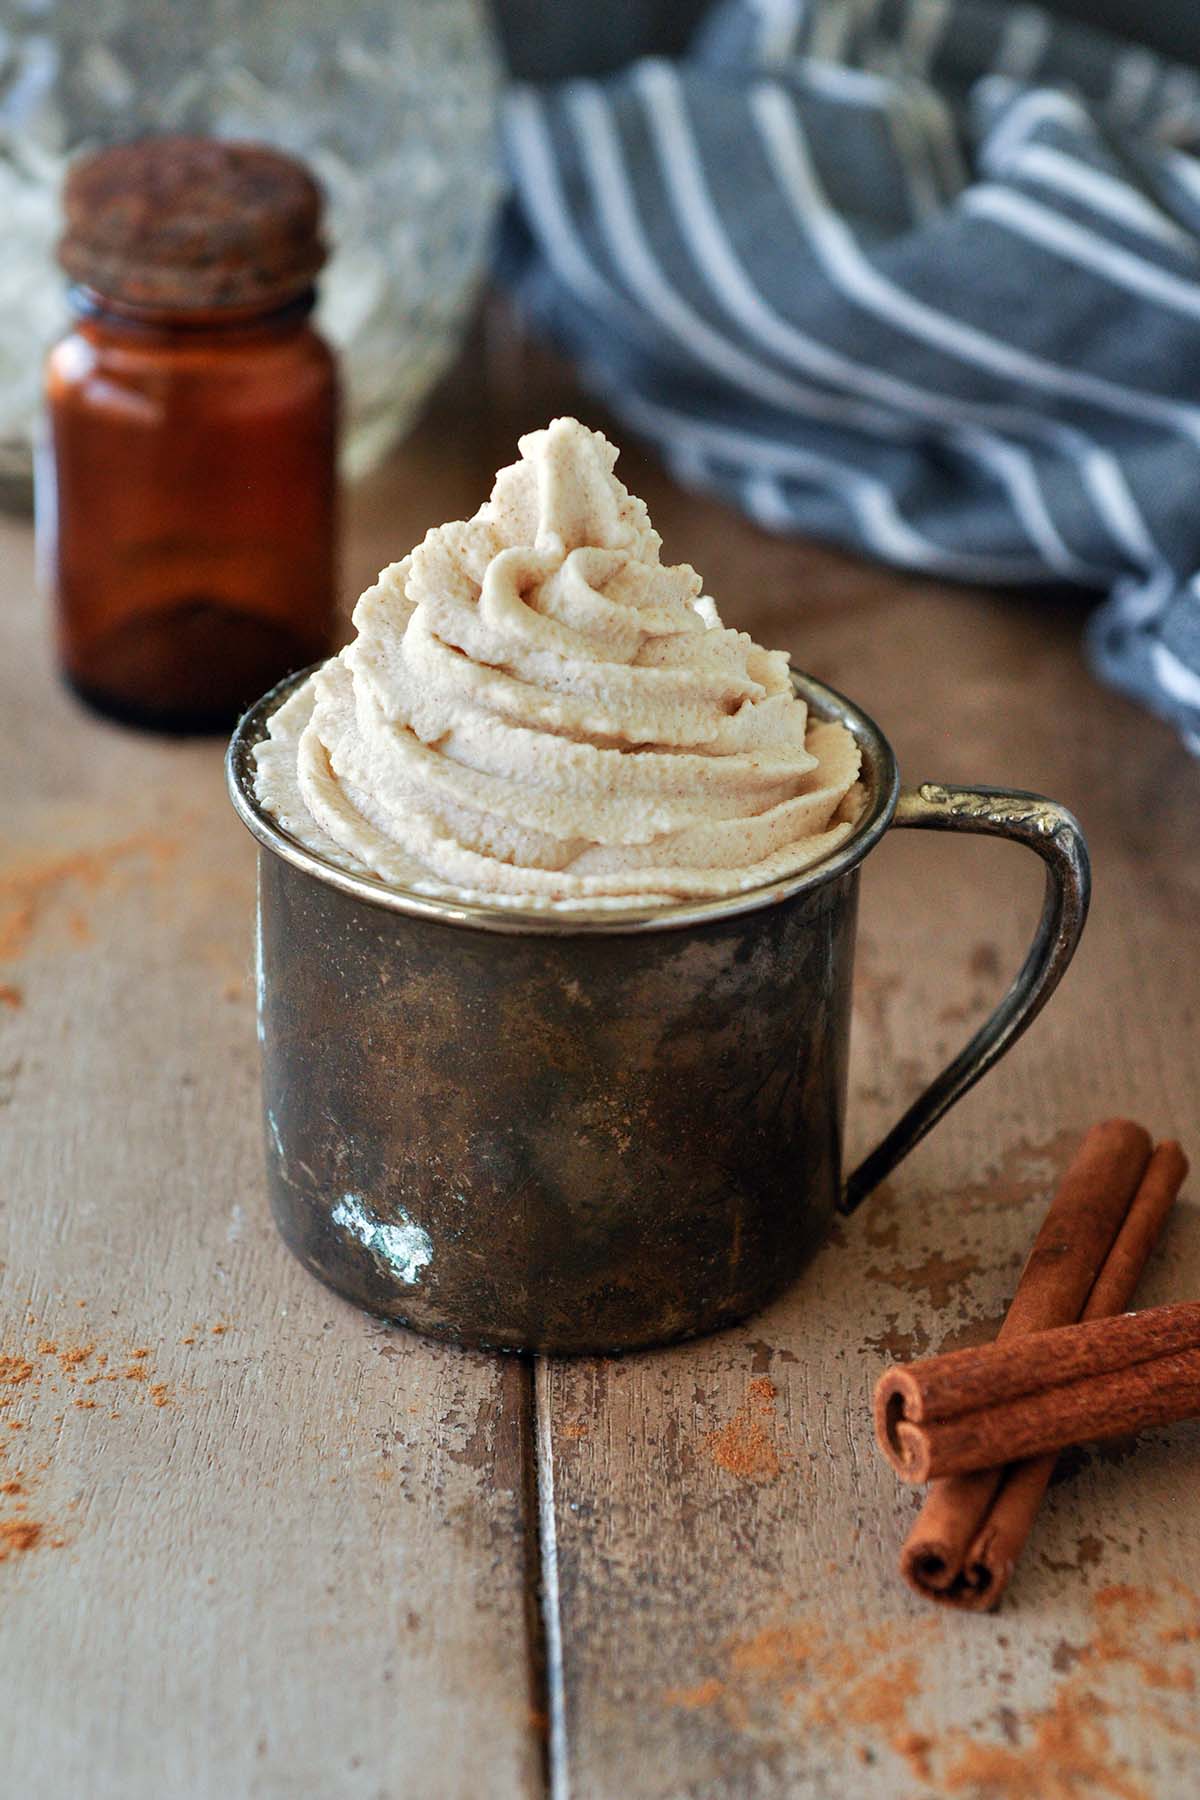 A metal cup filled with a swirl of cinnamon whipped cream, glass bottles in the background with a black striped towel and cinnamon sticks up front.